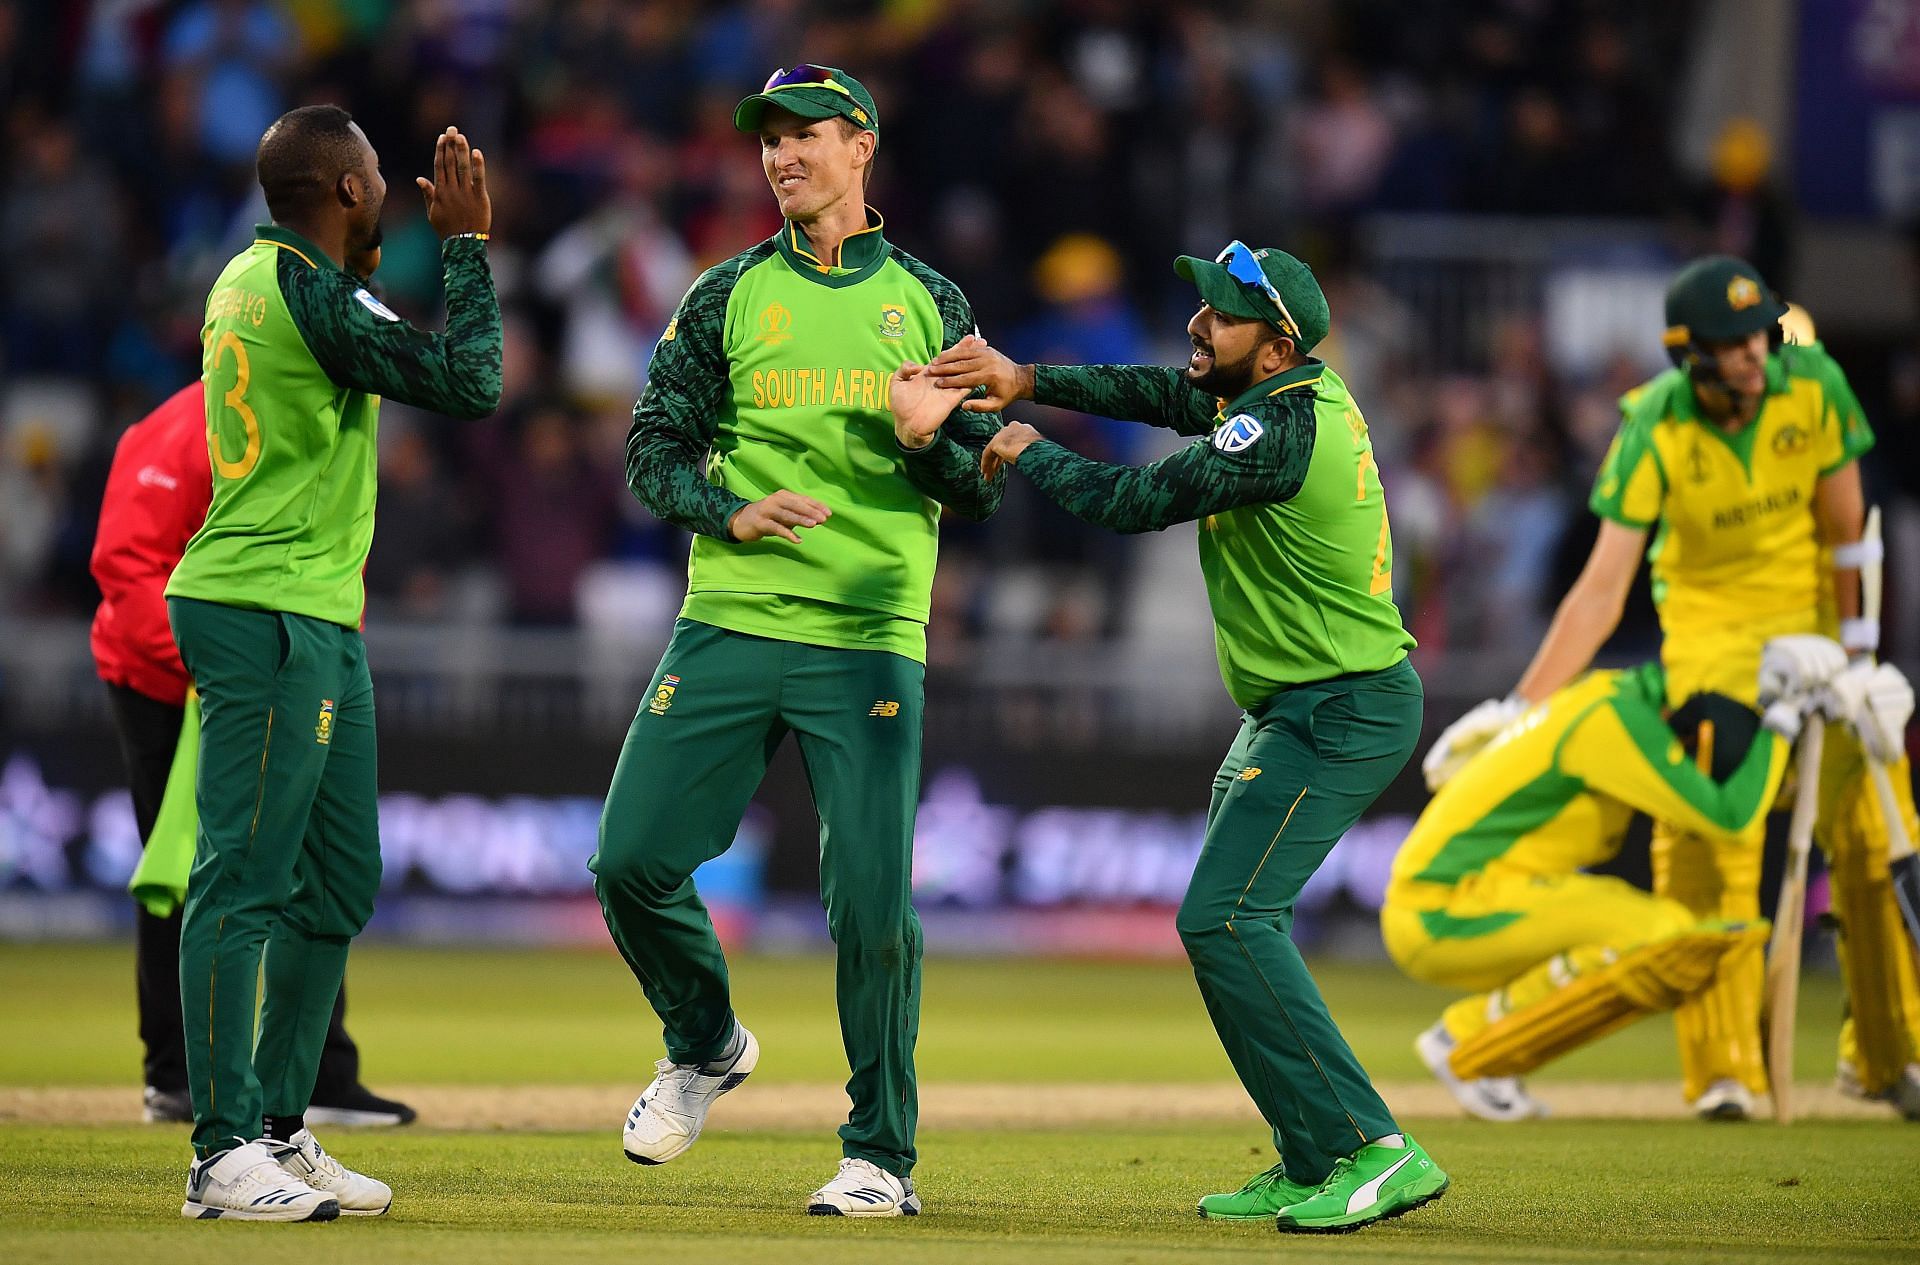 South Africa will be keen to end their ICC T20 World Cup title drought